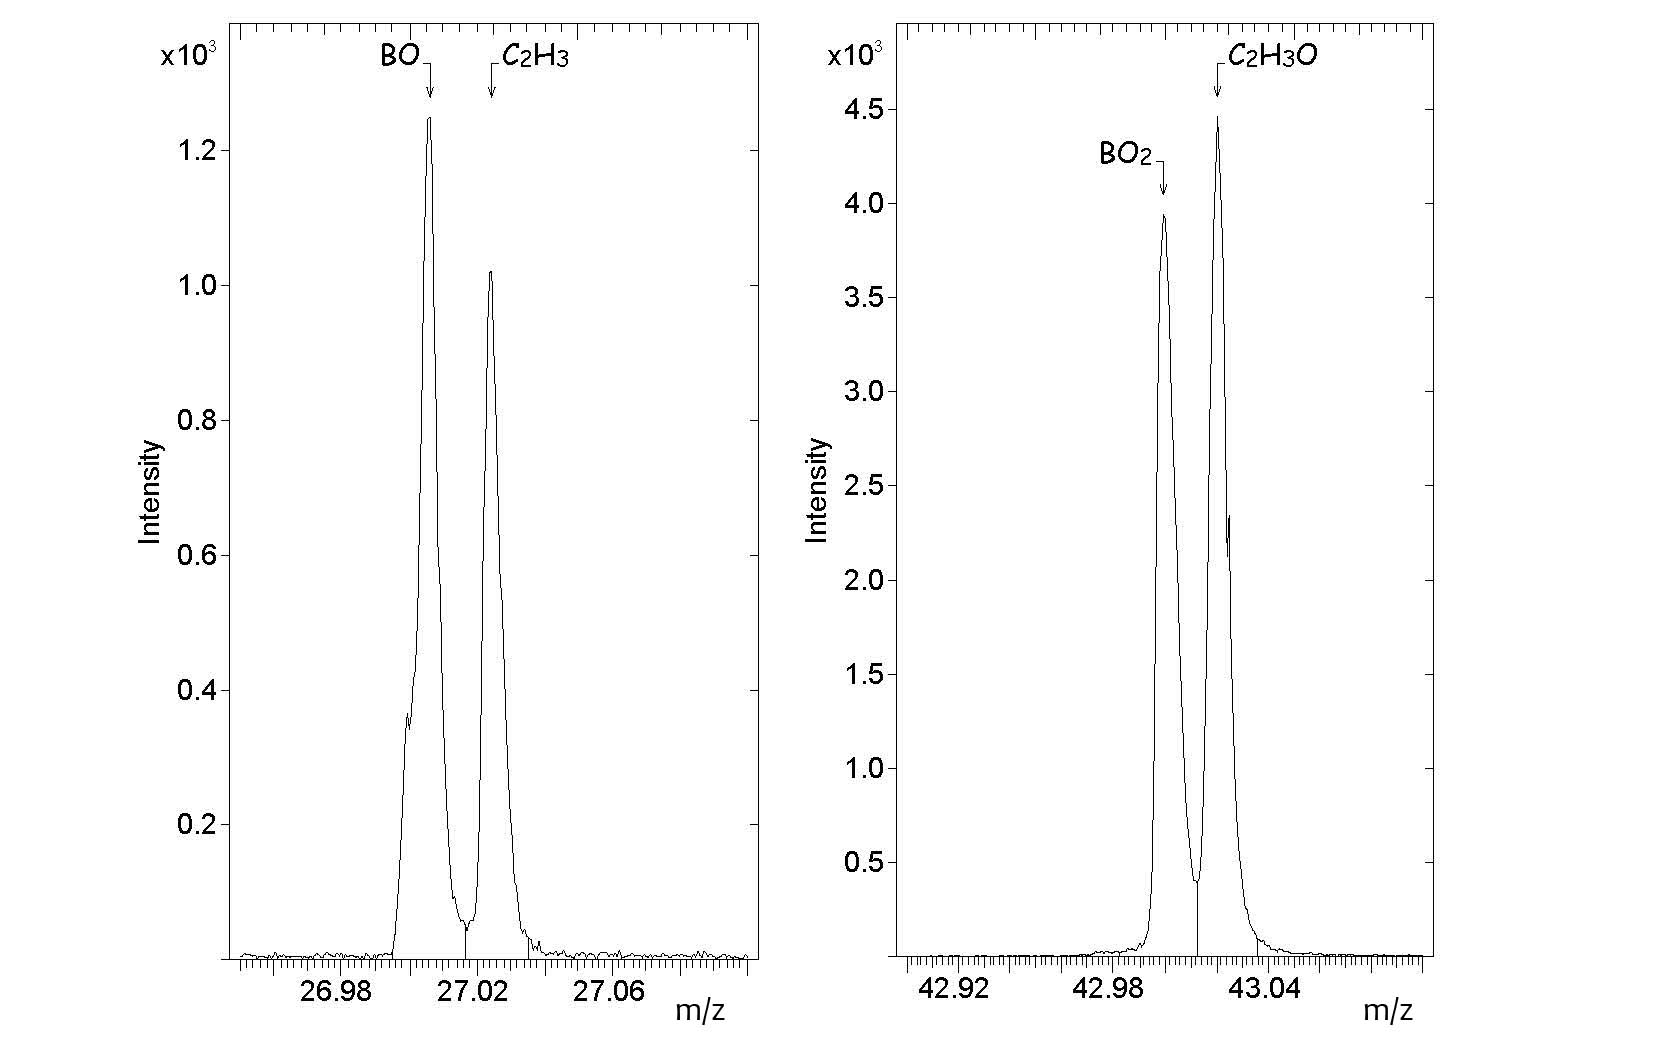 The BO
						- and BO
						2- peaks that originate from the boron dopant can be distinguished from neighbouring peaks of C
						2H
						3- and C
						2H
						3O
						-